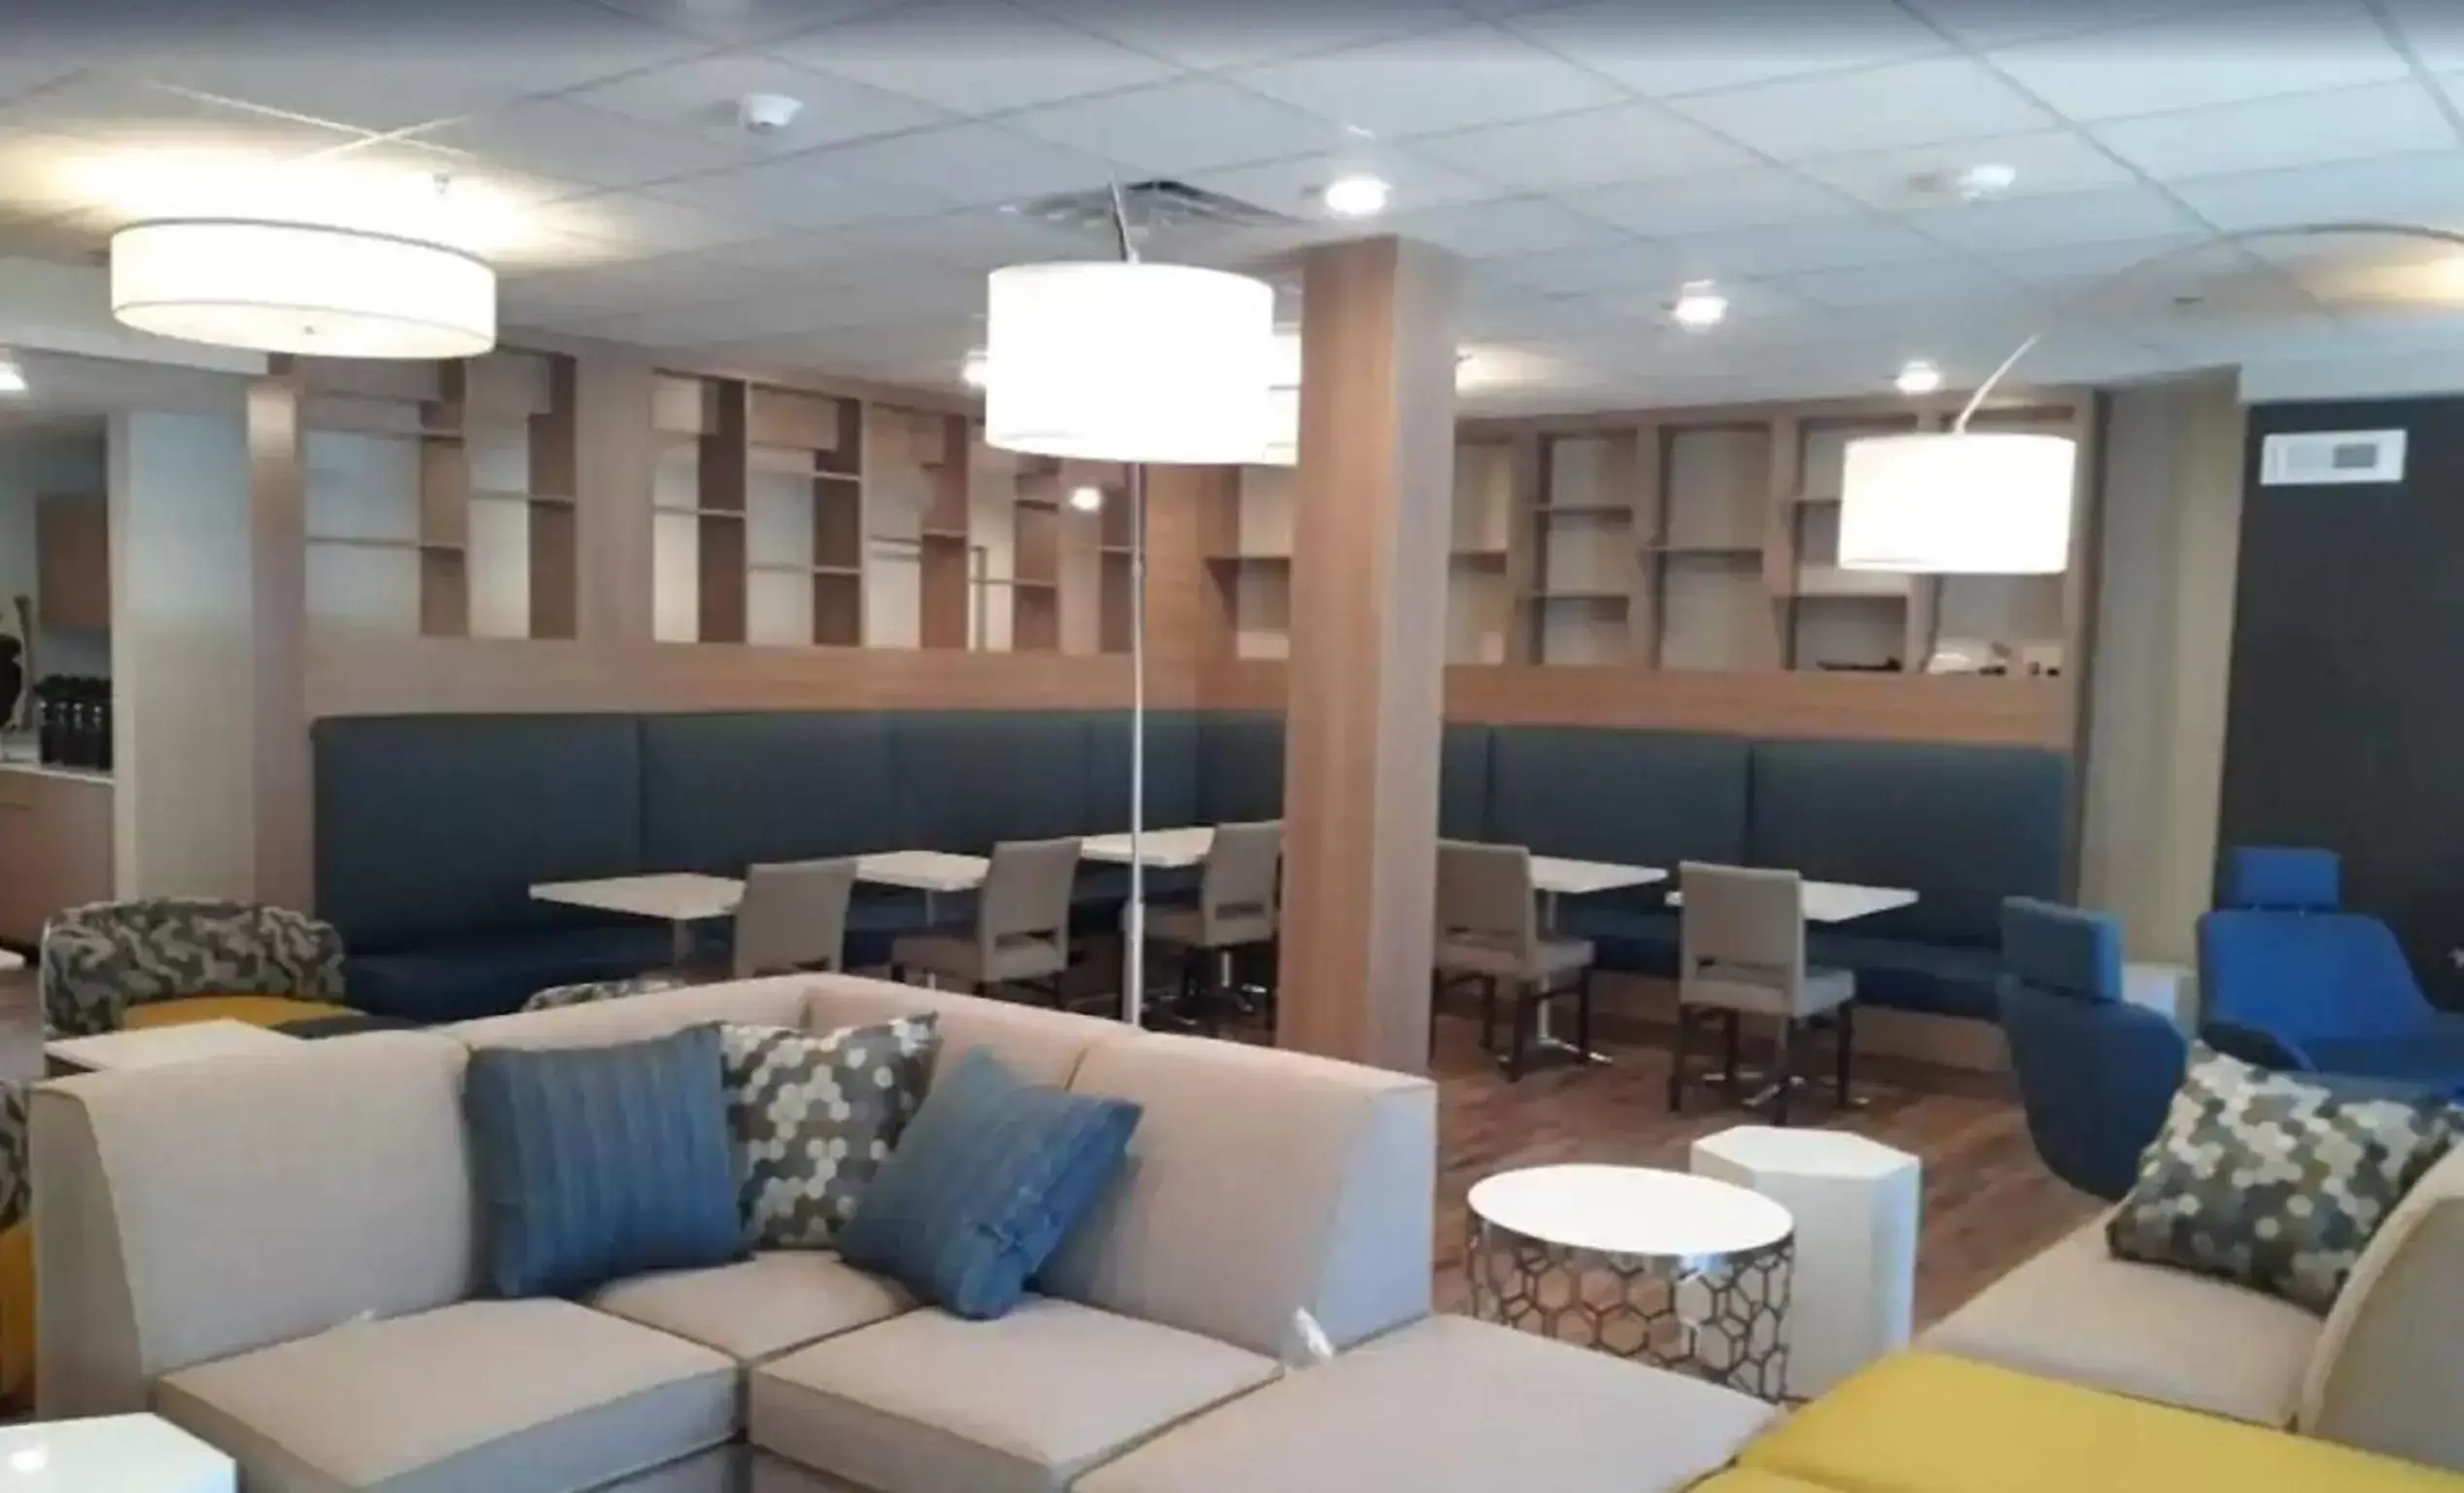 Lobby or reception in Microtel Inn & Suites by Wyndham Woodland Park